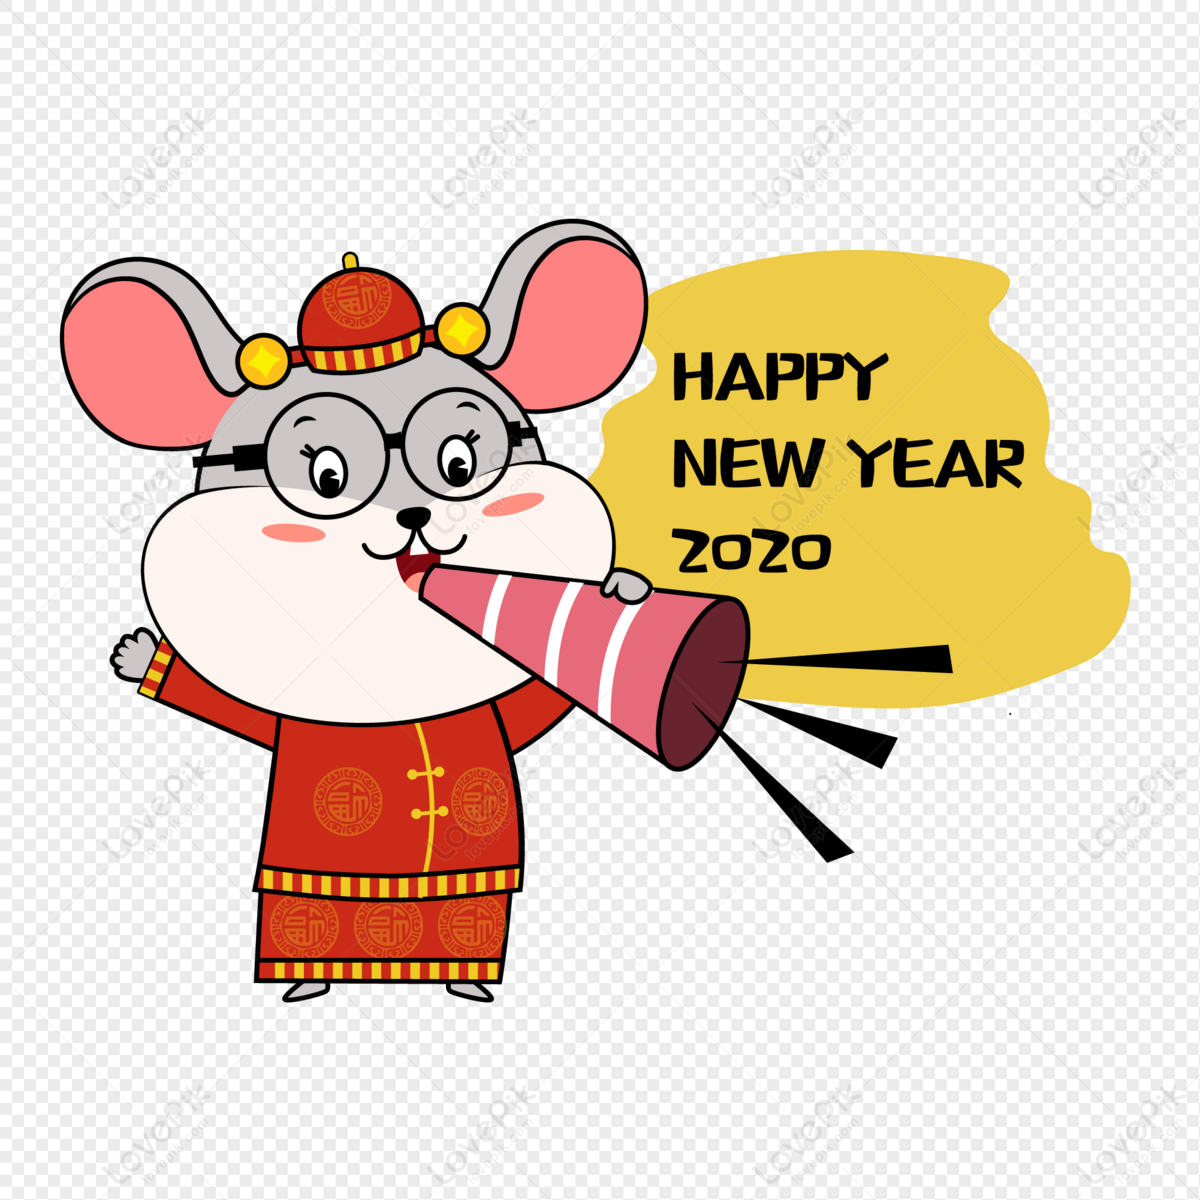 Happy New Year Of The Year Of The Rat Cartoon PNG Hd Transparent Image And  Clipart Image For Free Download - Lovepik | 401533134